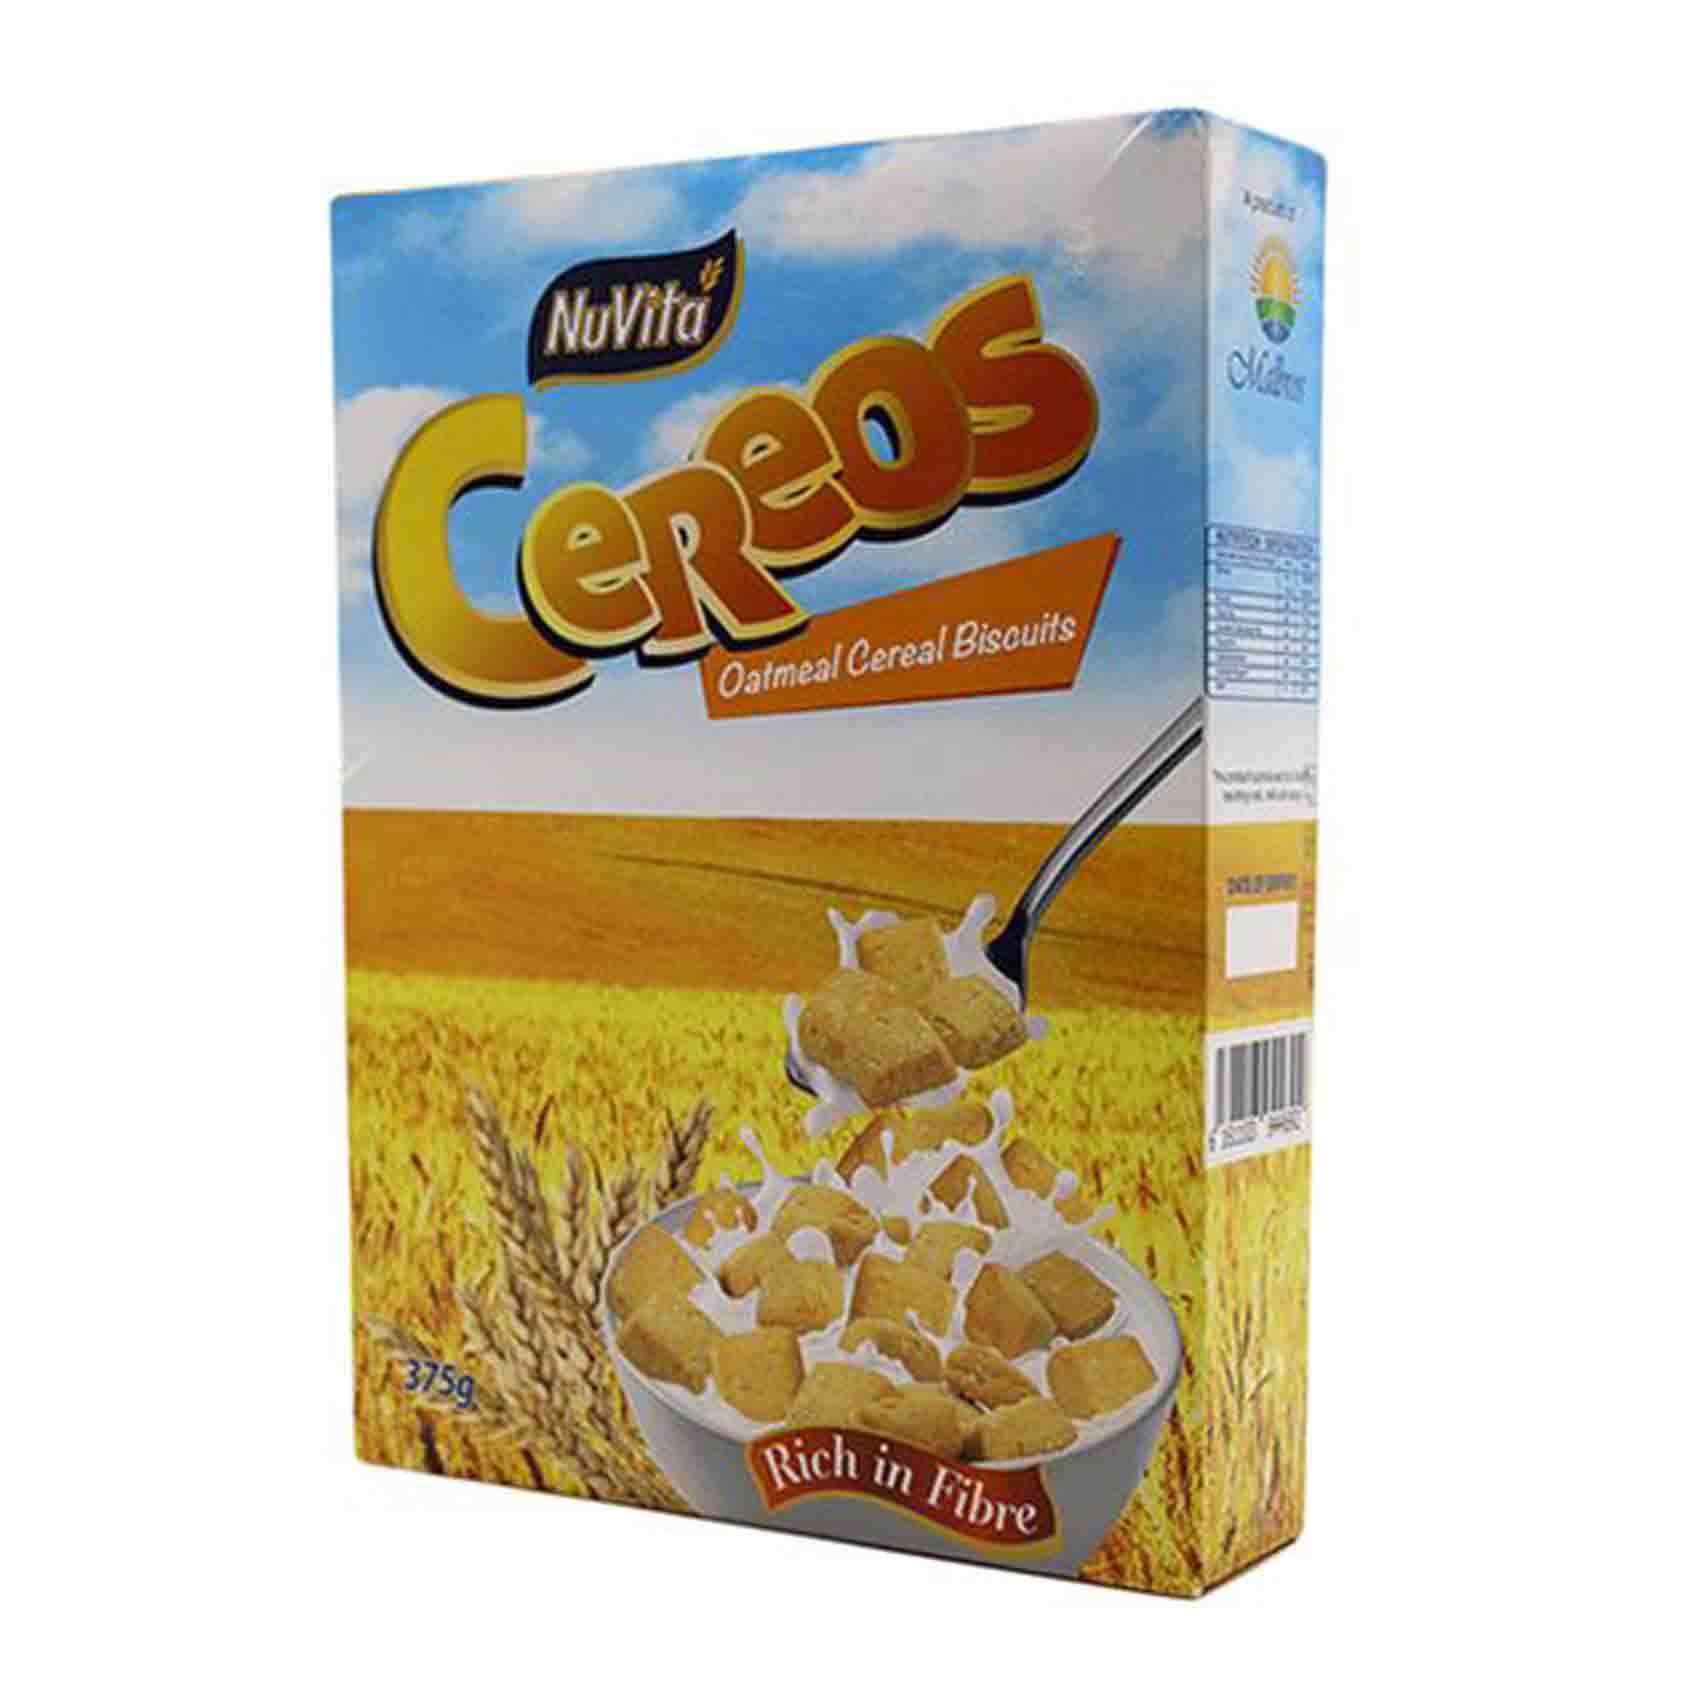 NuVita Cereos Oatmeal Cereal 375g